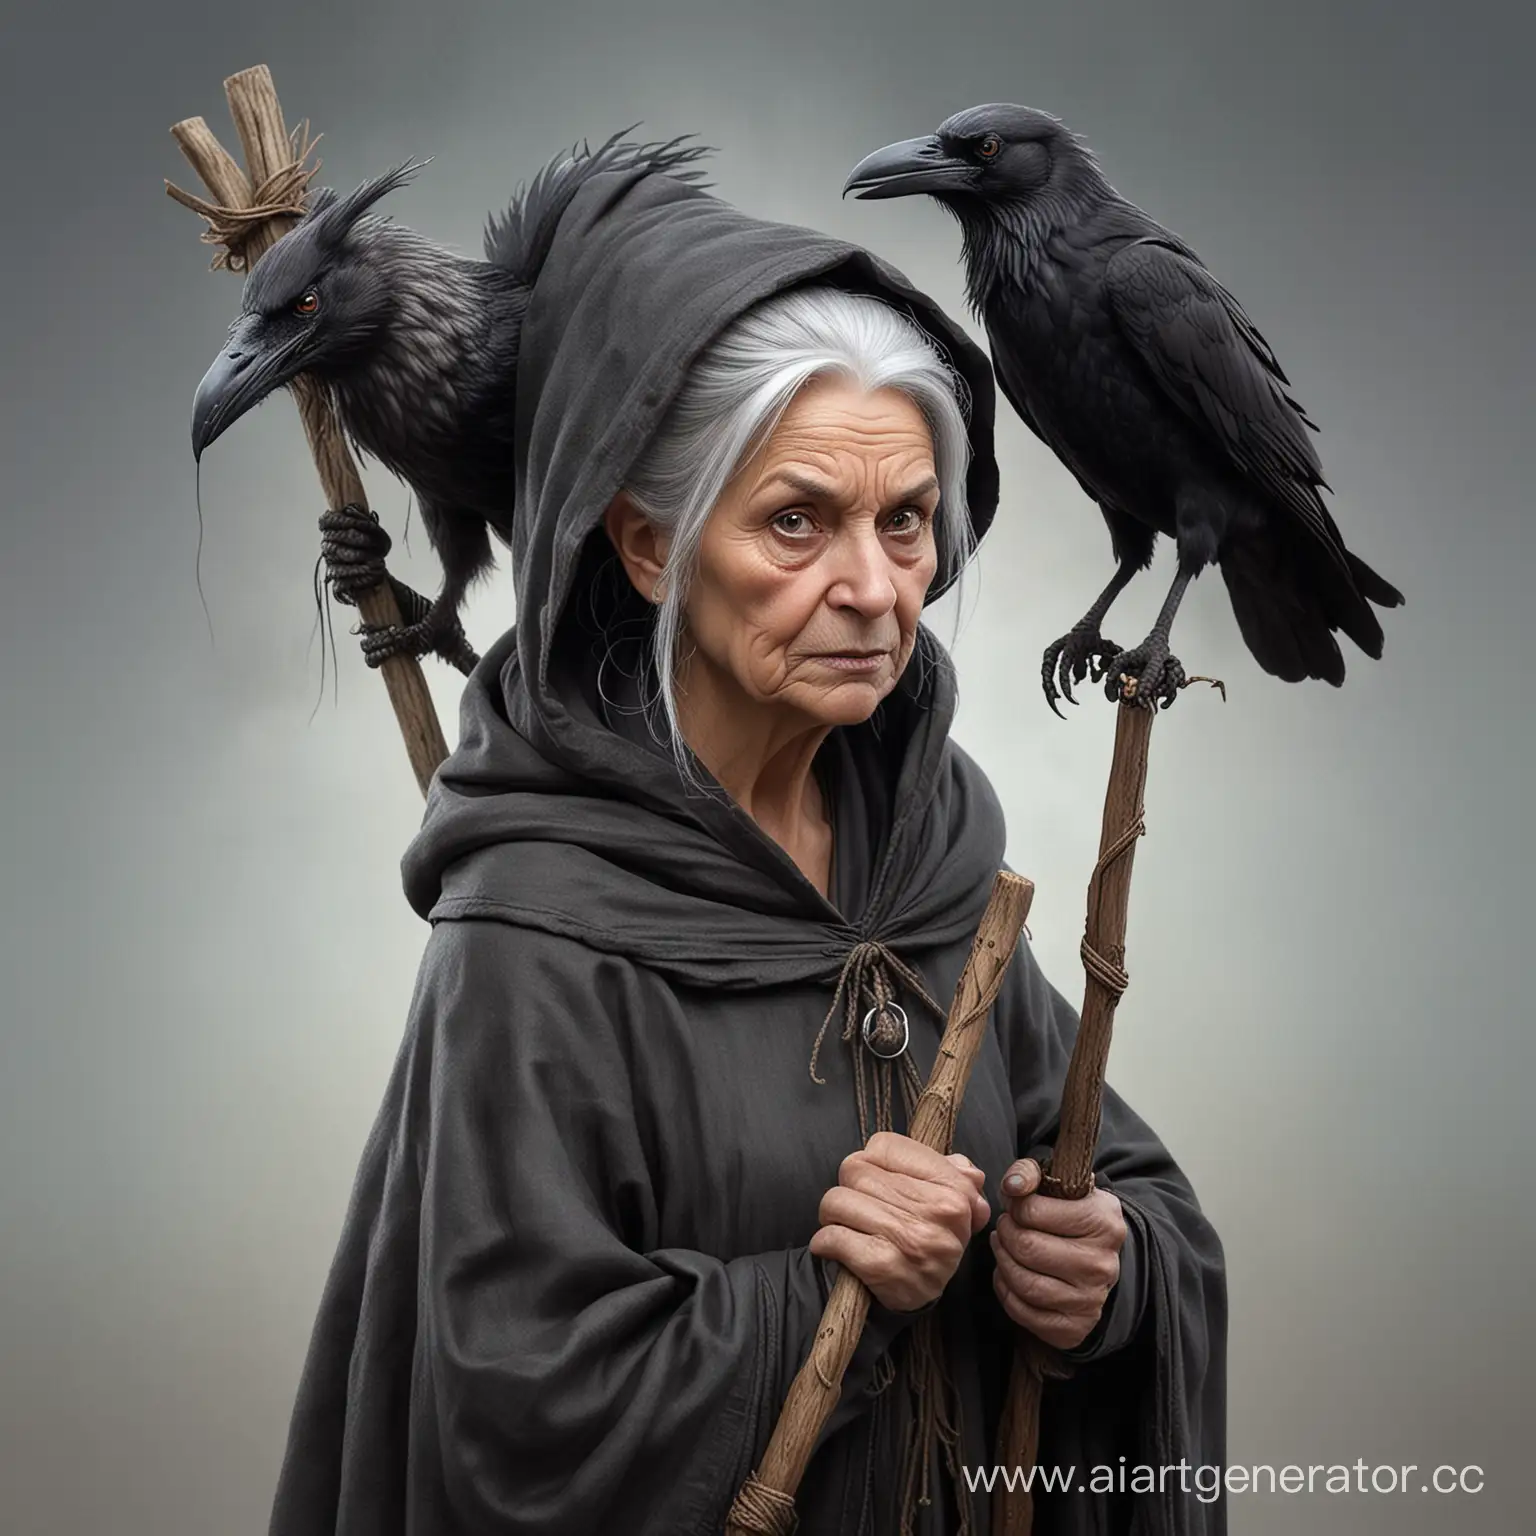 a short stooped old woman with gray hair in a bun with a wooden staff and a hooded cape, a witch on the shoulder of a raven  thin with long big hooked nose angry fantasy art